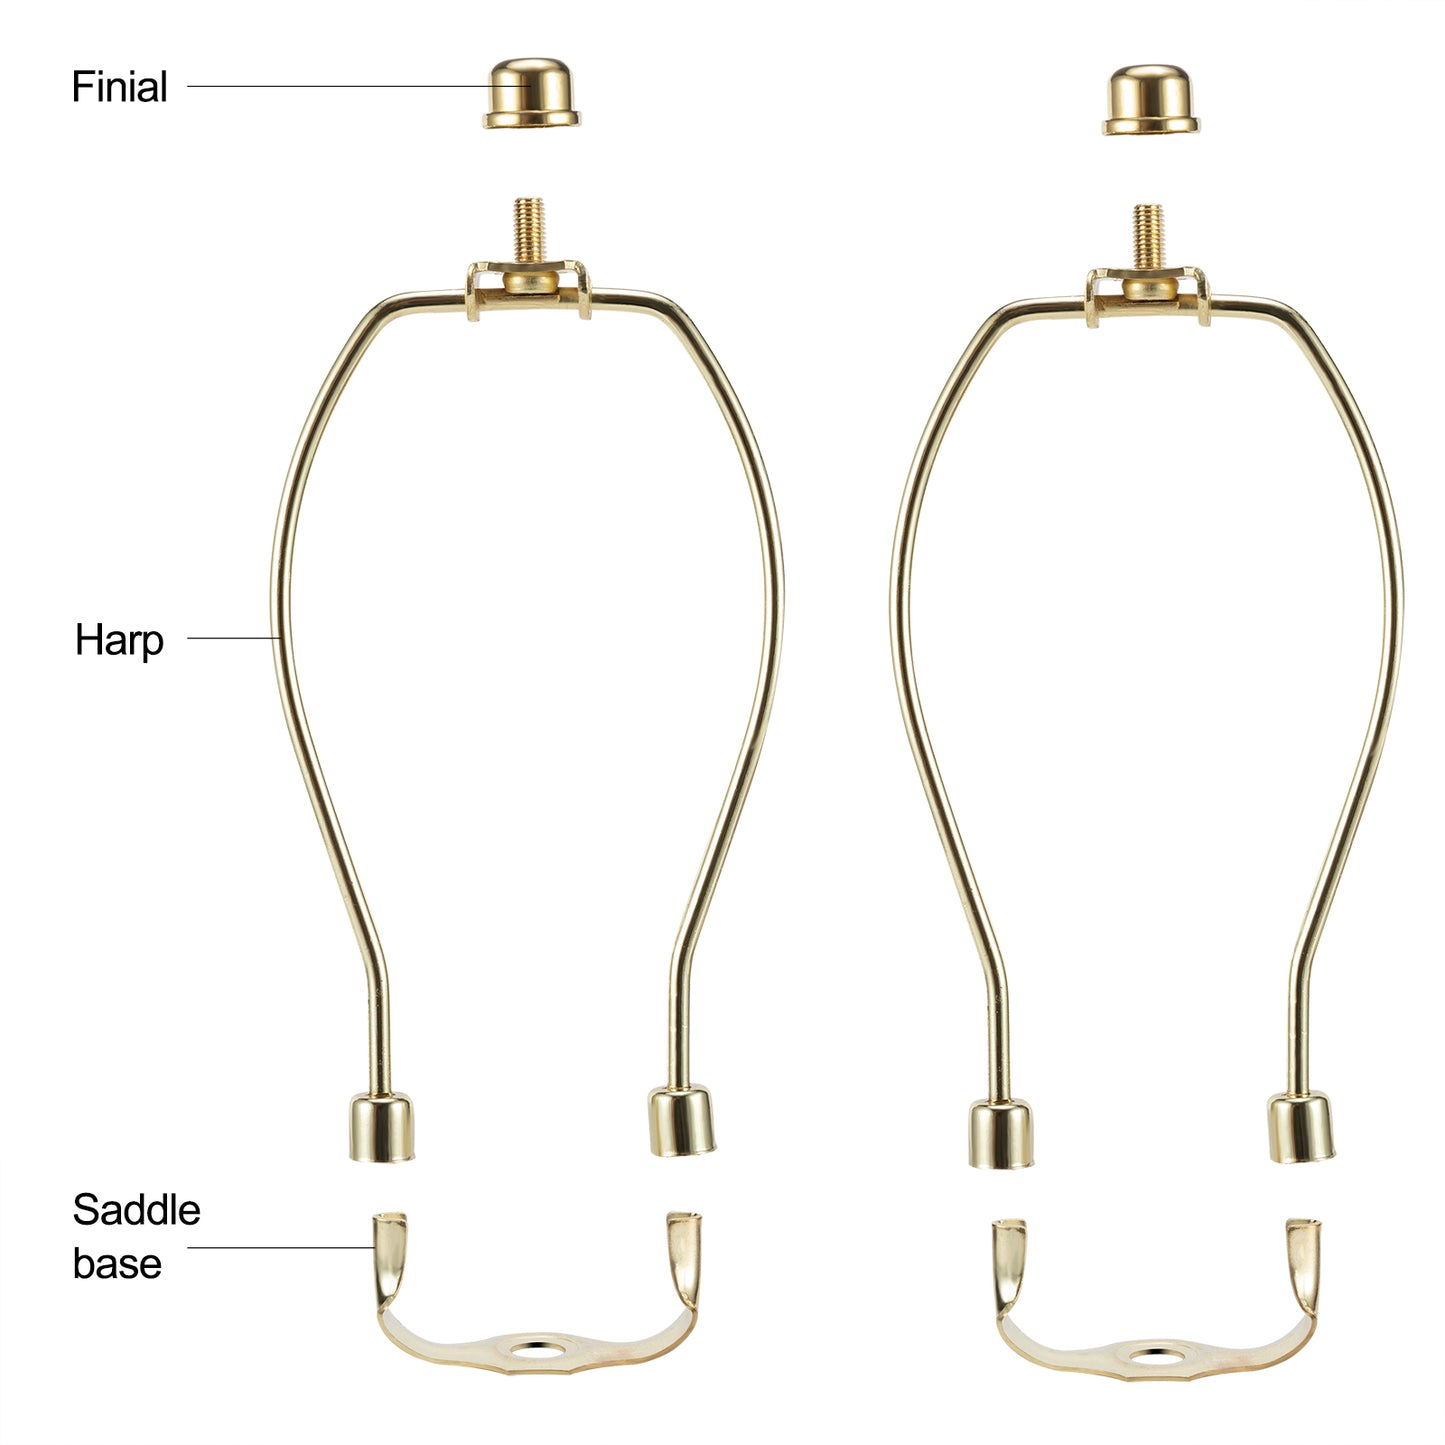 Light Duty Lamp Harp Holder Kit with Finial and Detachable Saddle Base